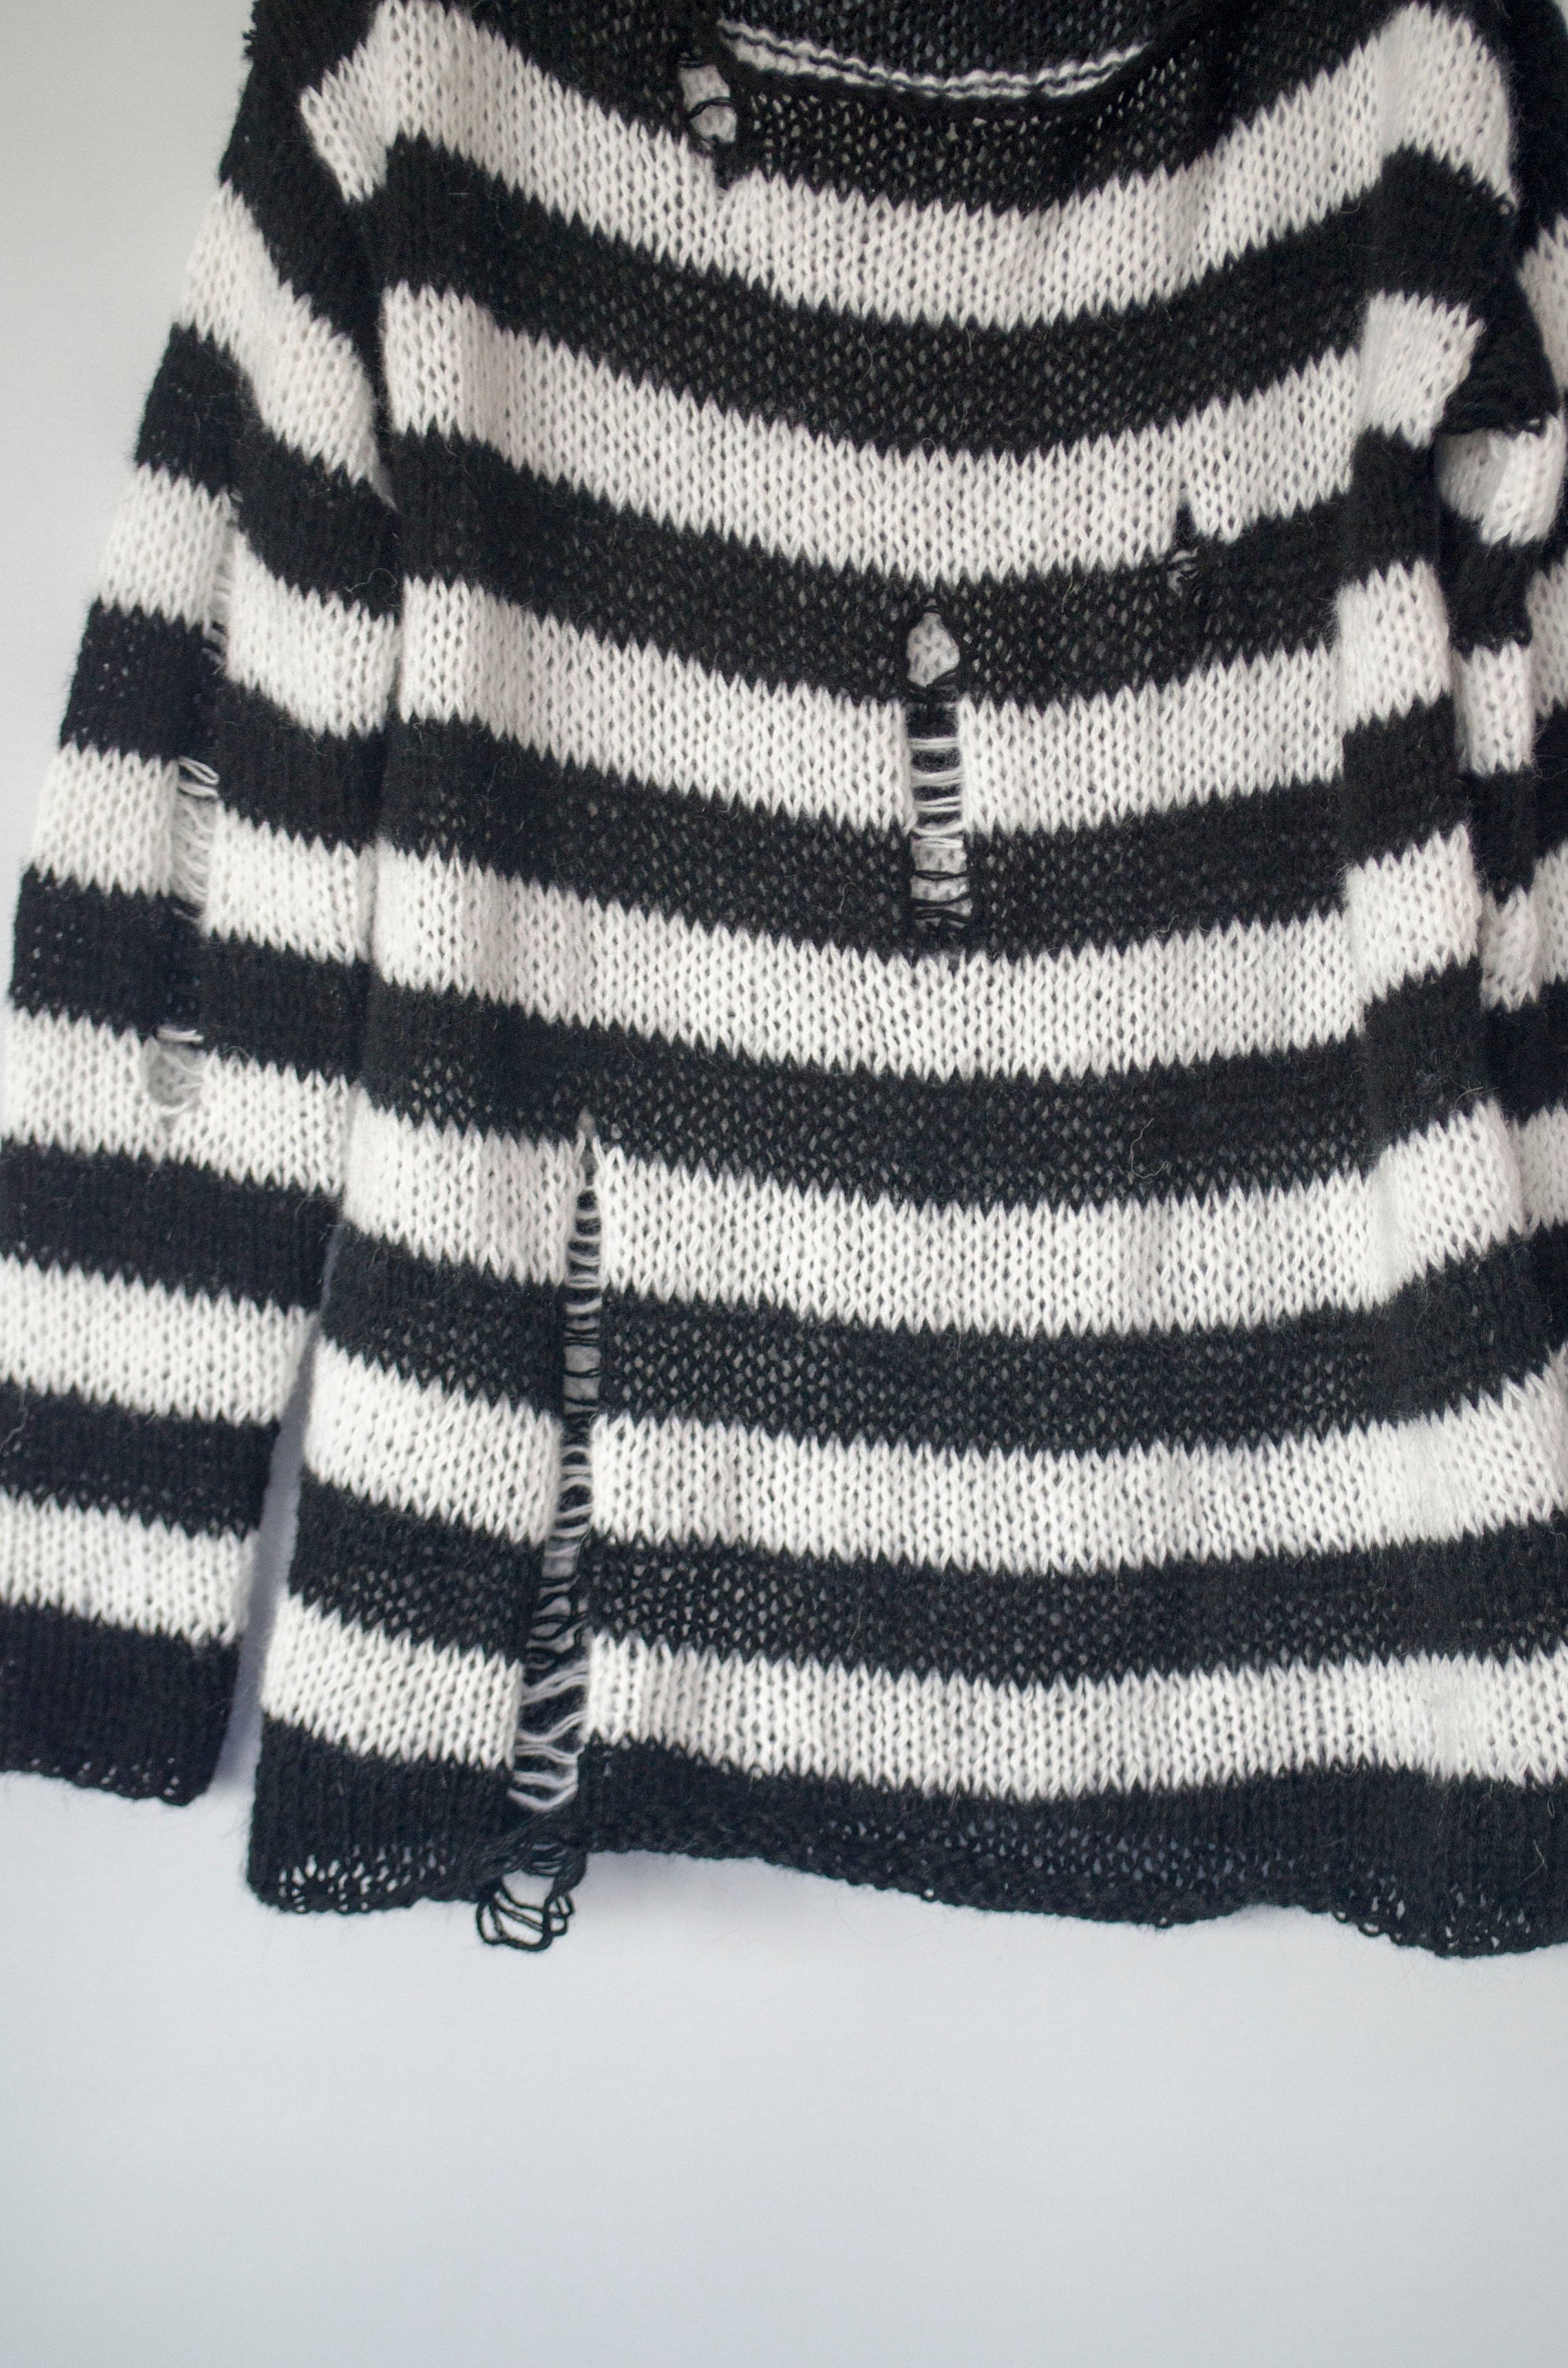 Black and White Colorblock Striped Distressed Ripped Sweater 